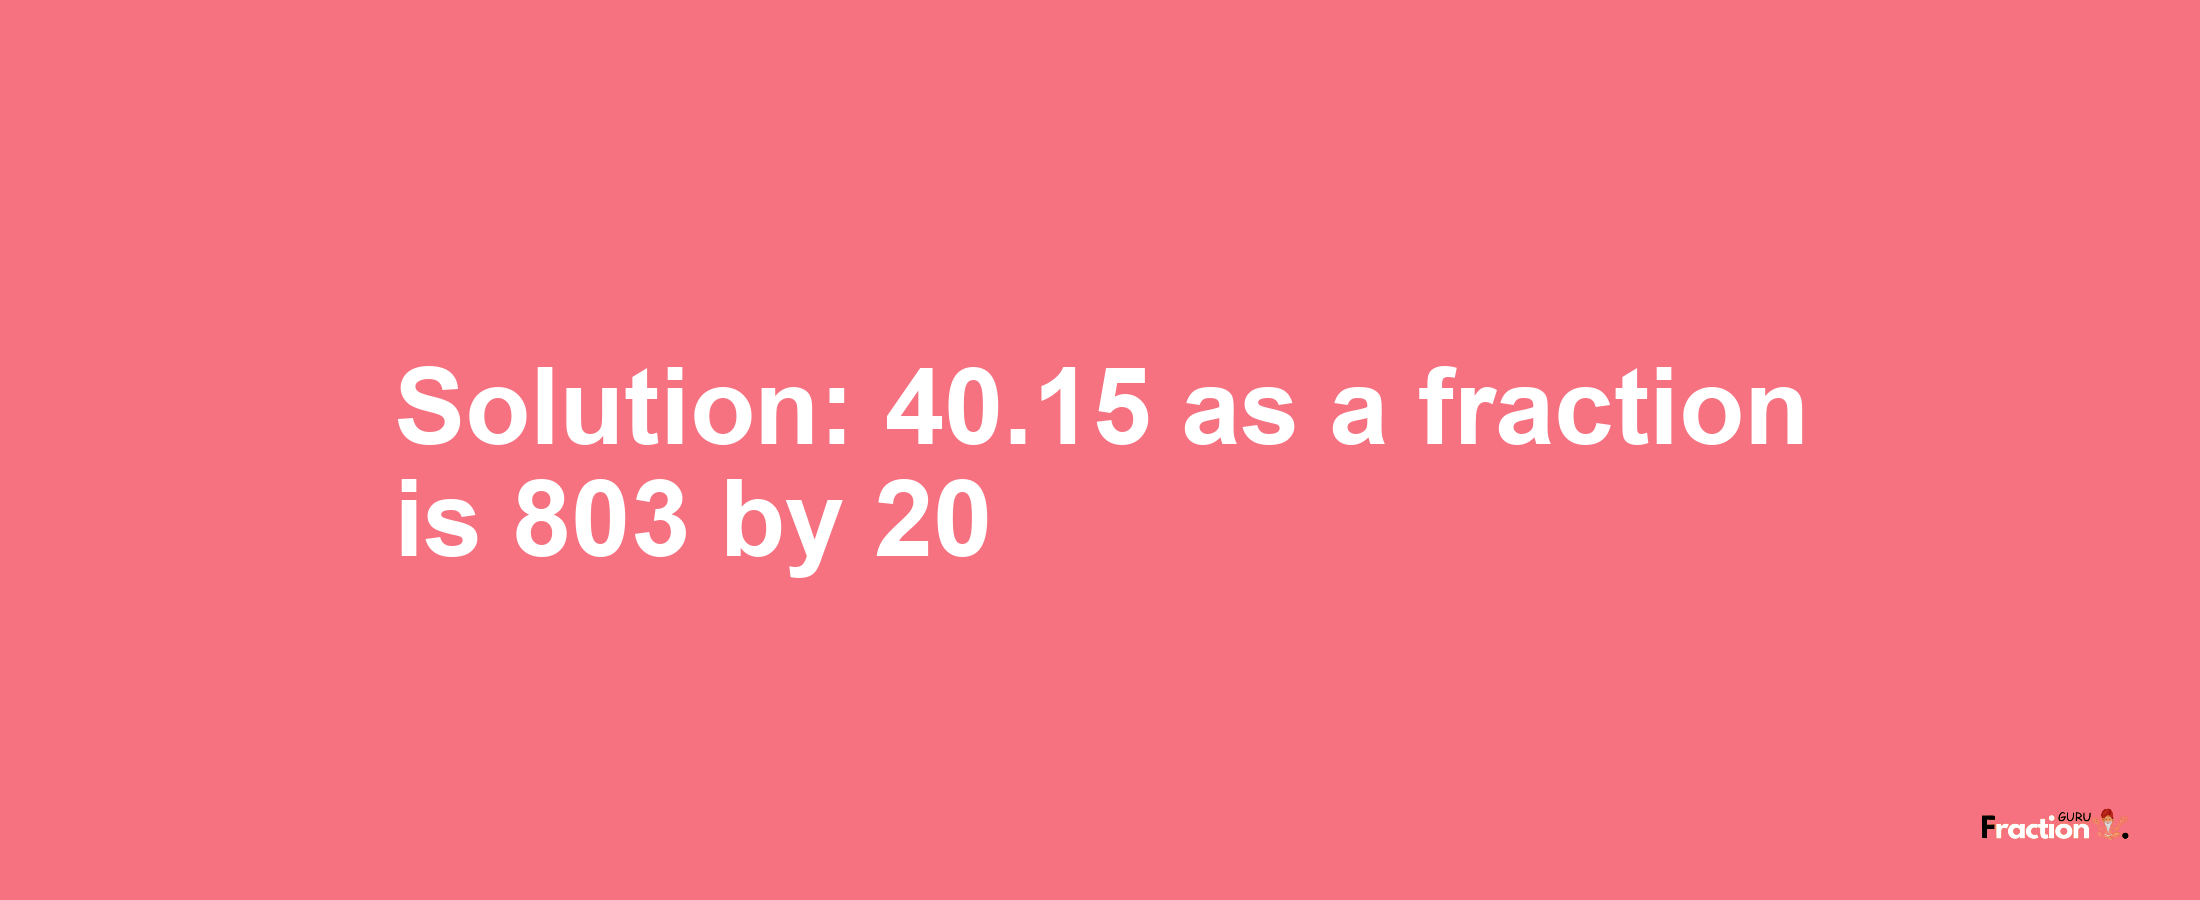 Solution:40.15 as a fraction is 803/20